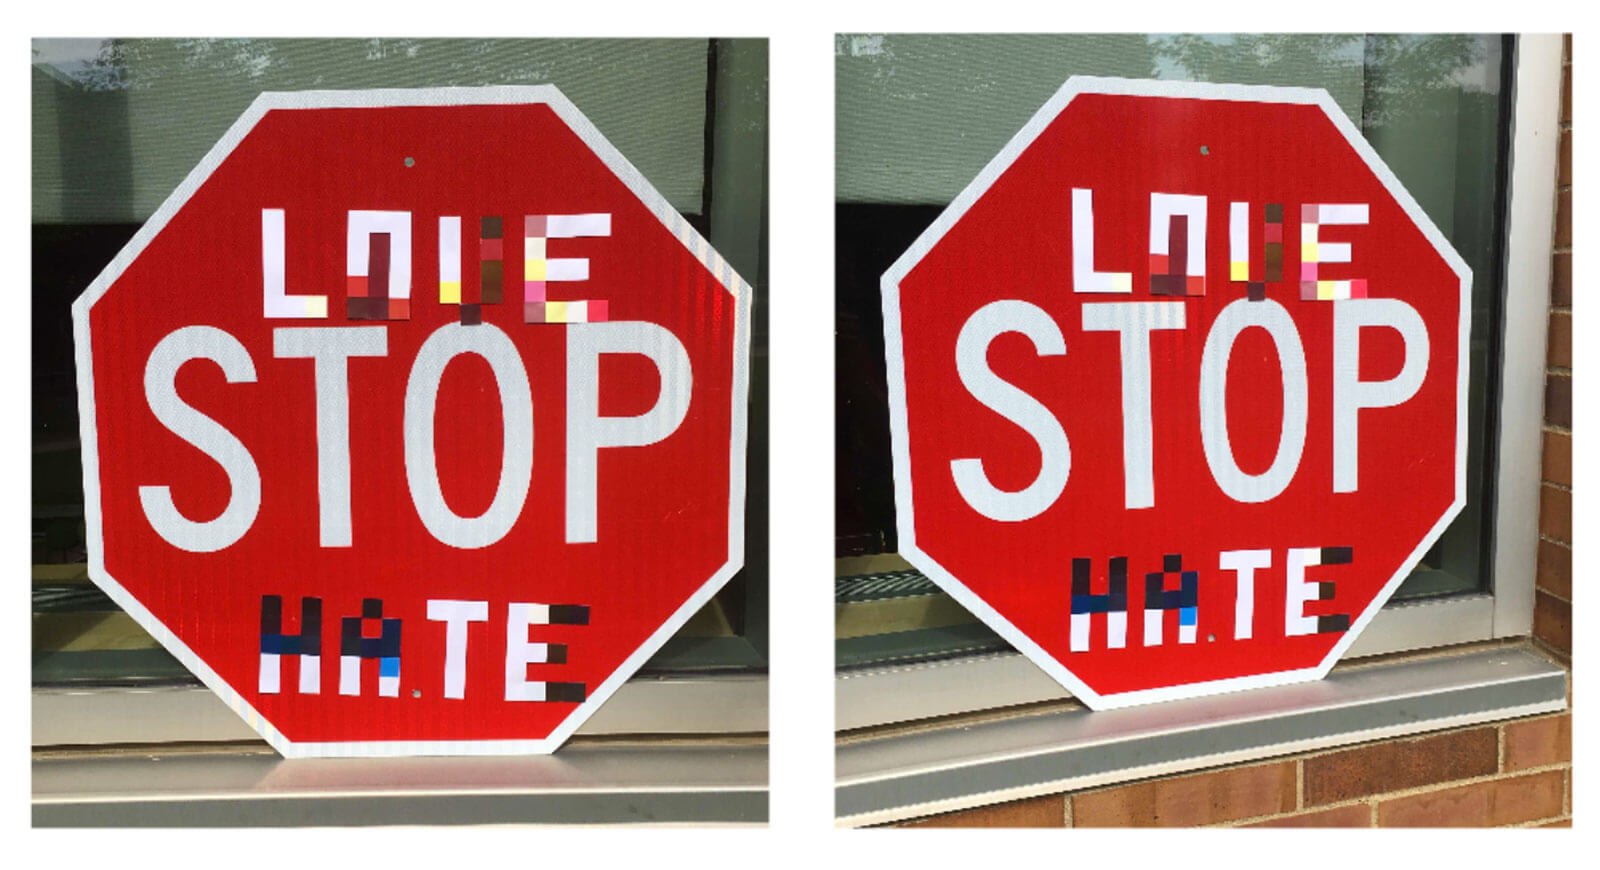 Researchers show how to confuse self-driving cars by adding stickers to street signs